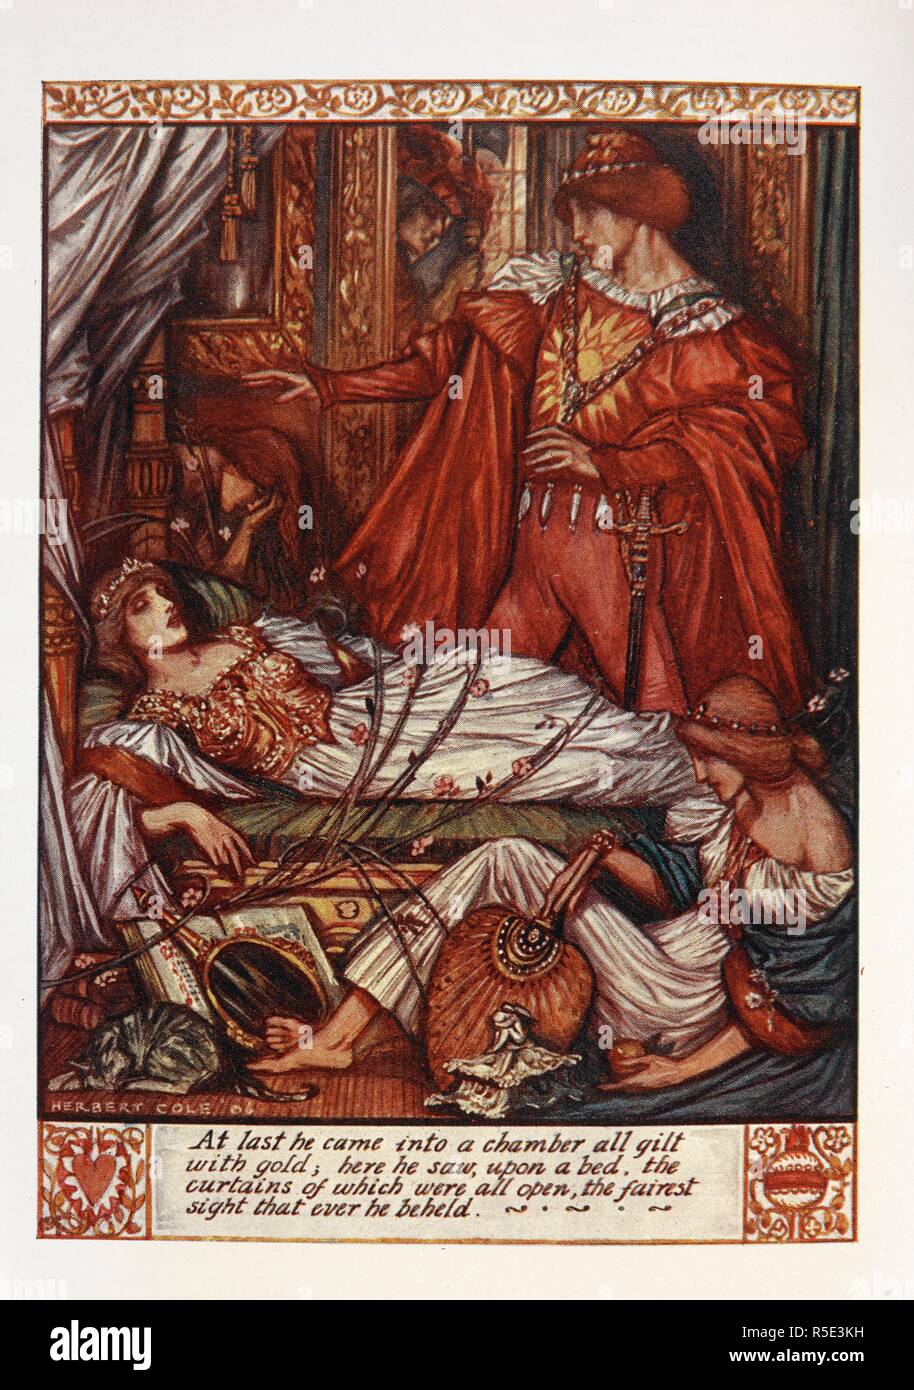 The sleeping beauty. Fairy-Gold: a book of old English fairy tales, chosen by Ernest Rhys, illustrated by Herbert Cole. London : J. M. Dent & Co., 1906. Source: 12411.d.22 facing 293. Stock Photo